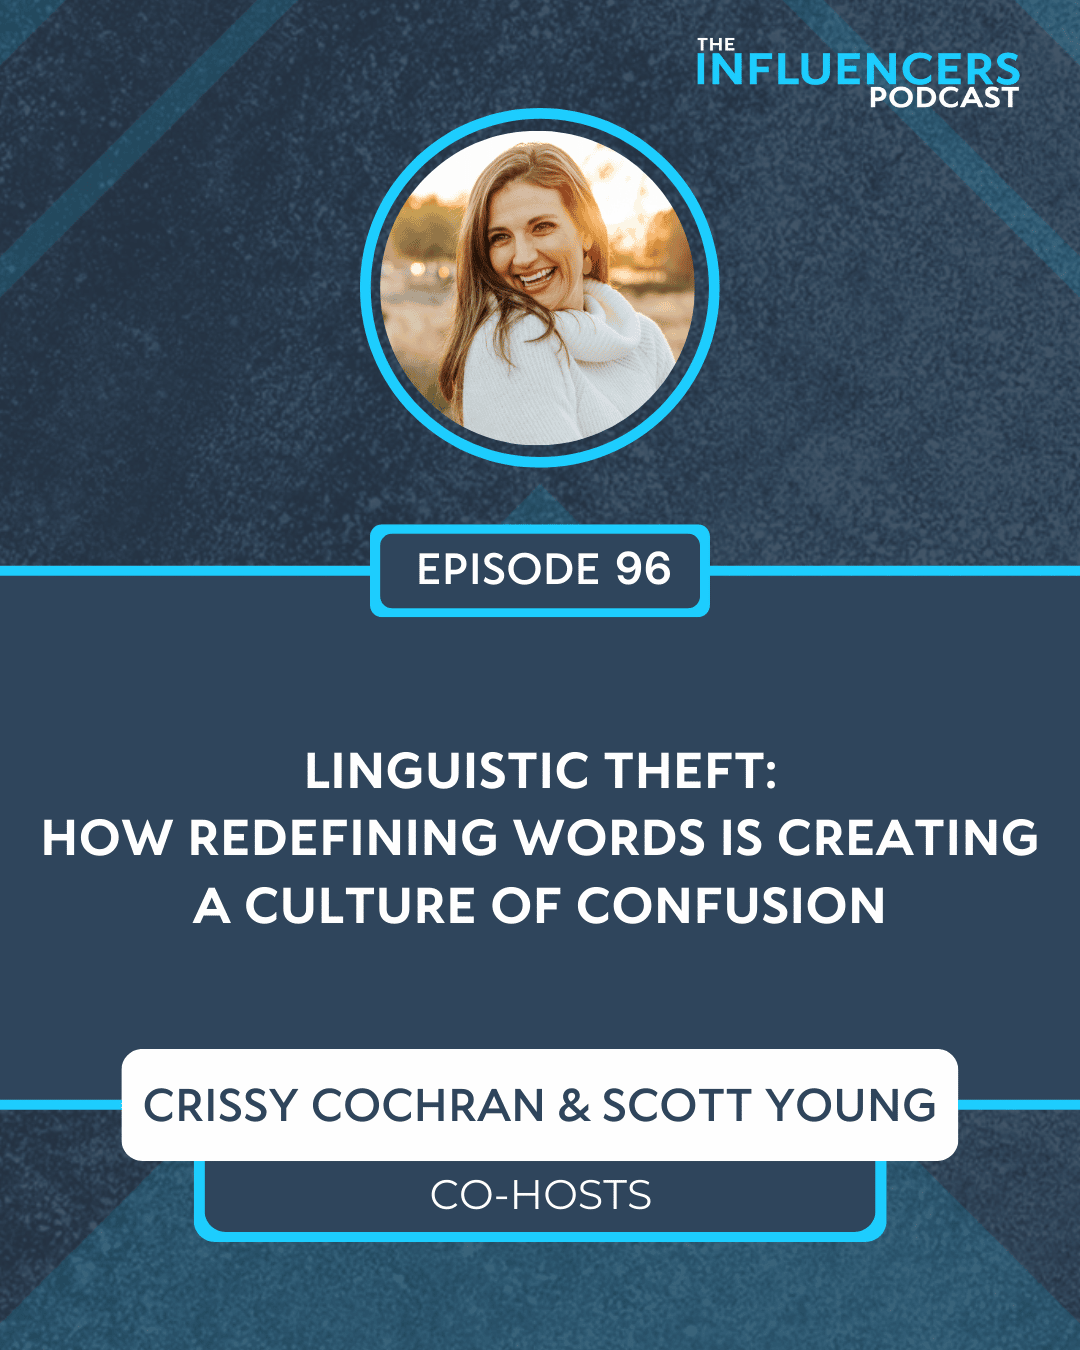 Episode 96 with Crissy Cochran.